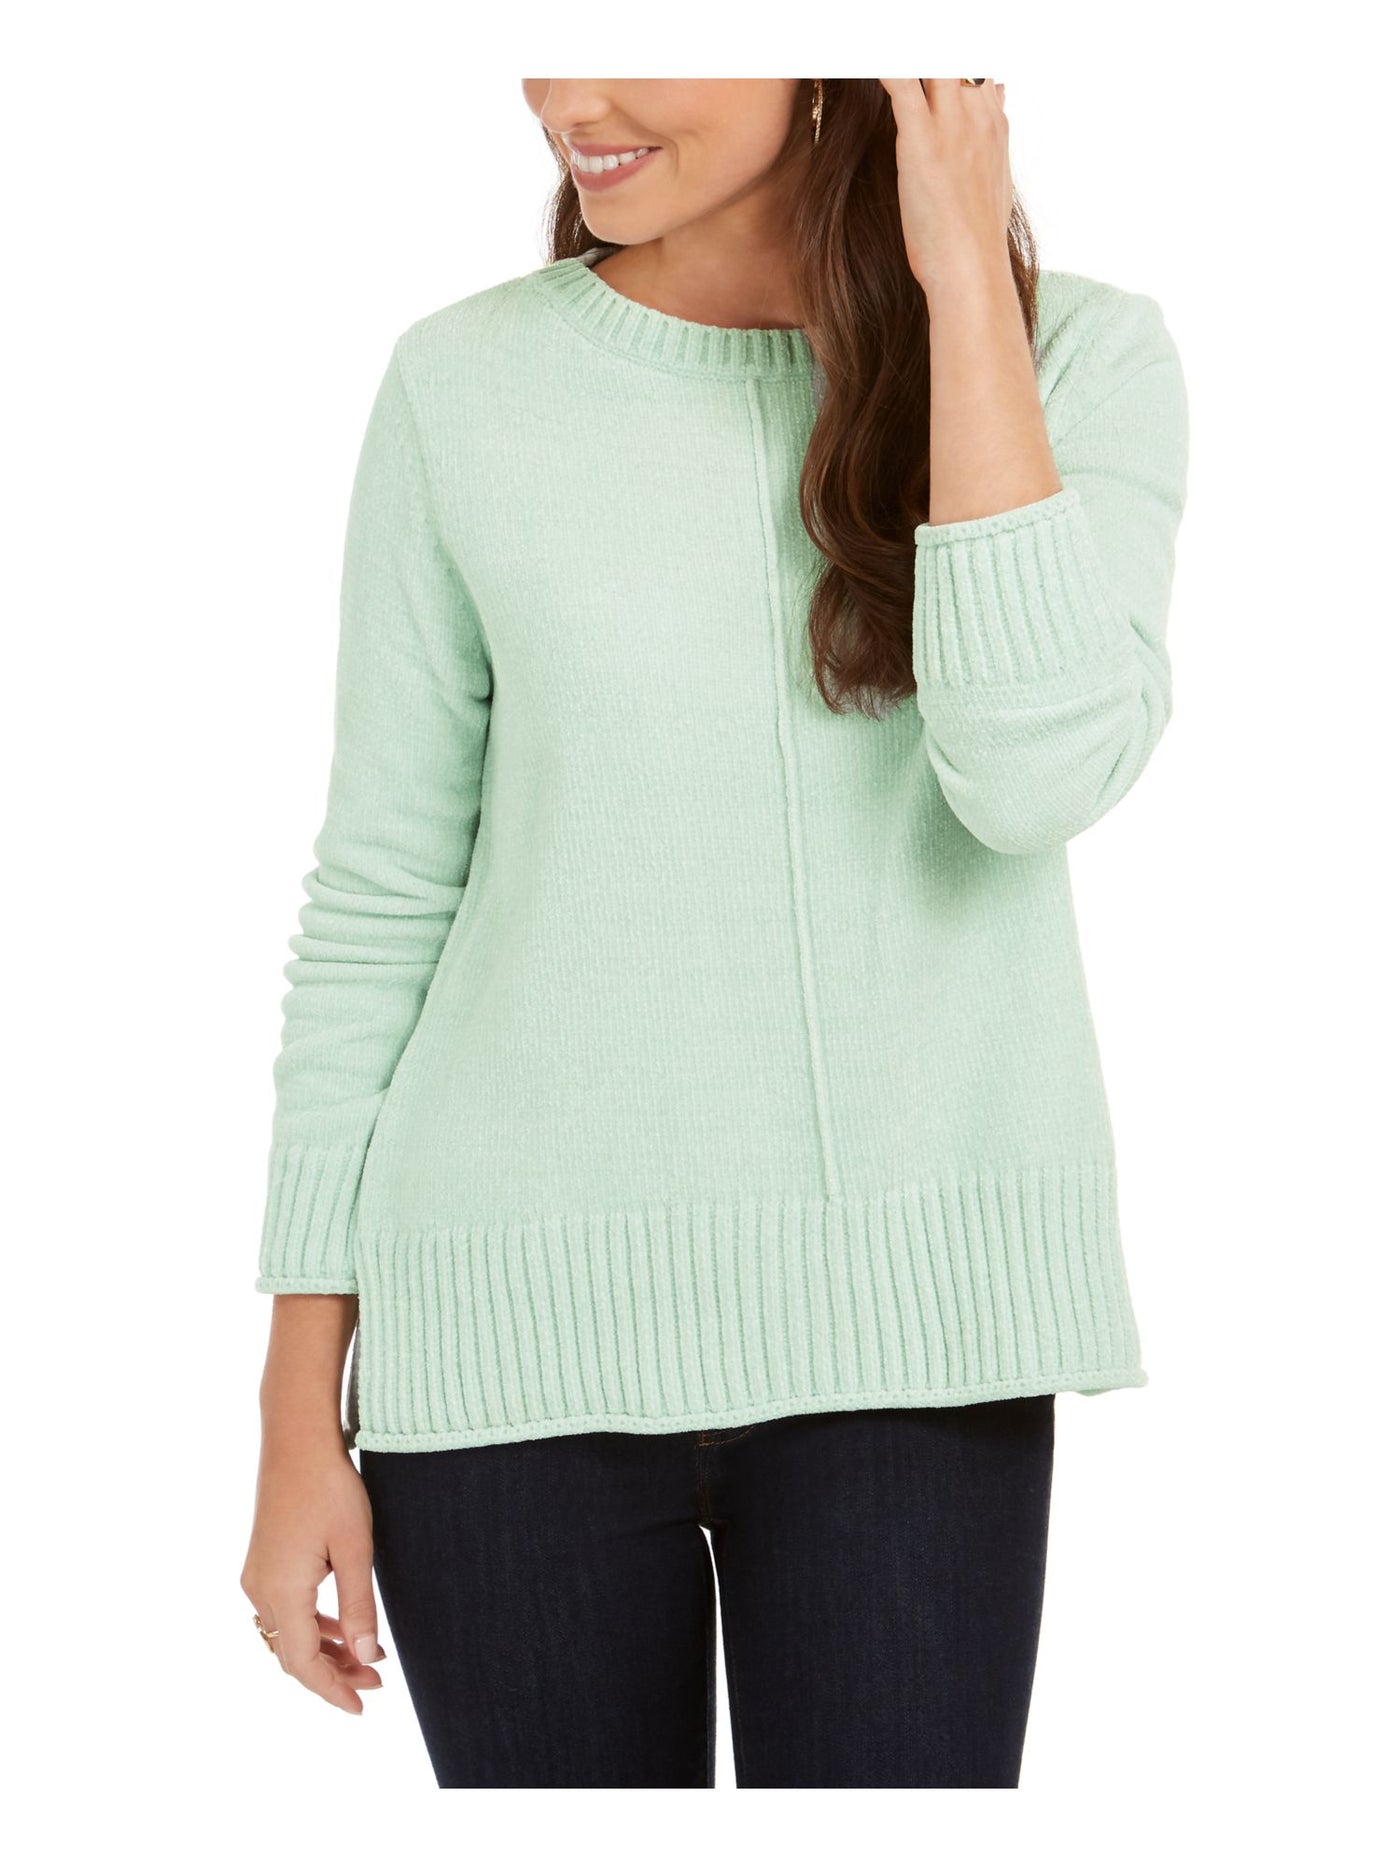 STYLE & COMPANY Womens Green Textured Ribbed 3/4 Sleeve Crew Neck Sweater Petites PM